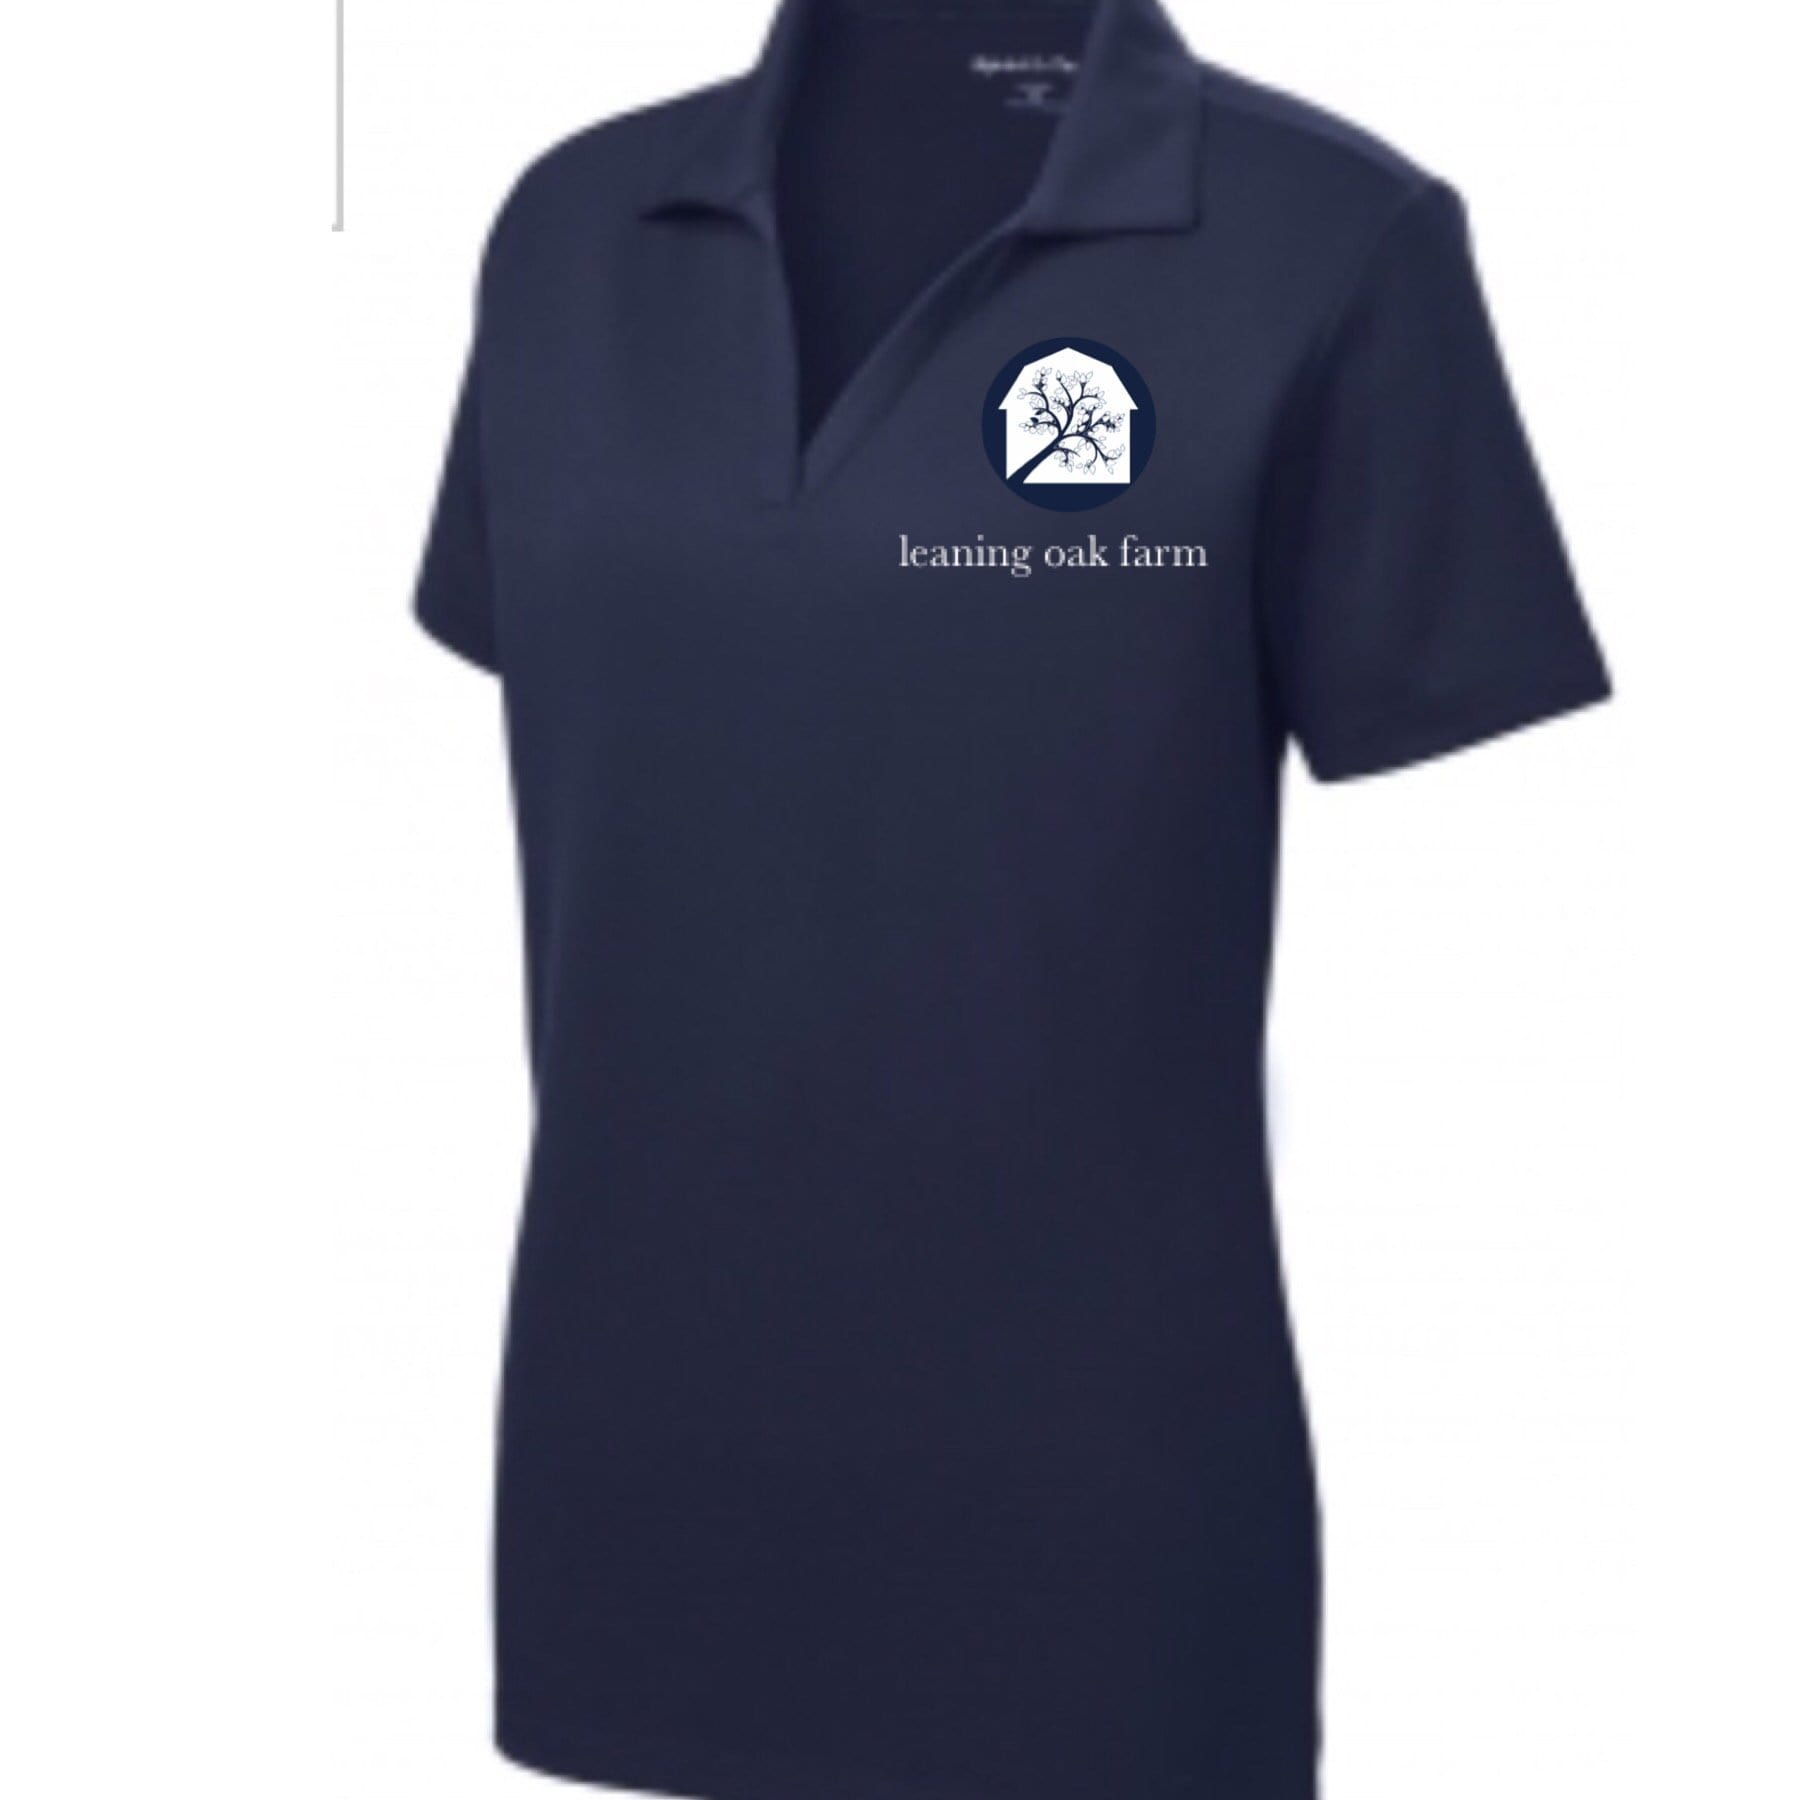 Equestrian Team Apparel Custom Team Shirts XS / Navy Leaning Oak Farm Polo equestrian team apparel online tack store mobile tack store custom farm apparel custom show stable clothing equestrian lifestyle horse show clothing riding clothes horses equestrian tack store